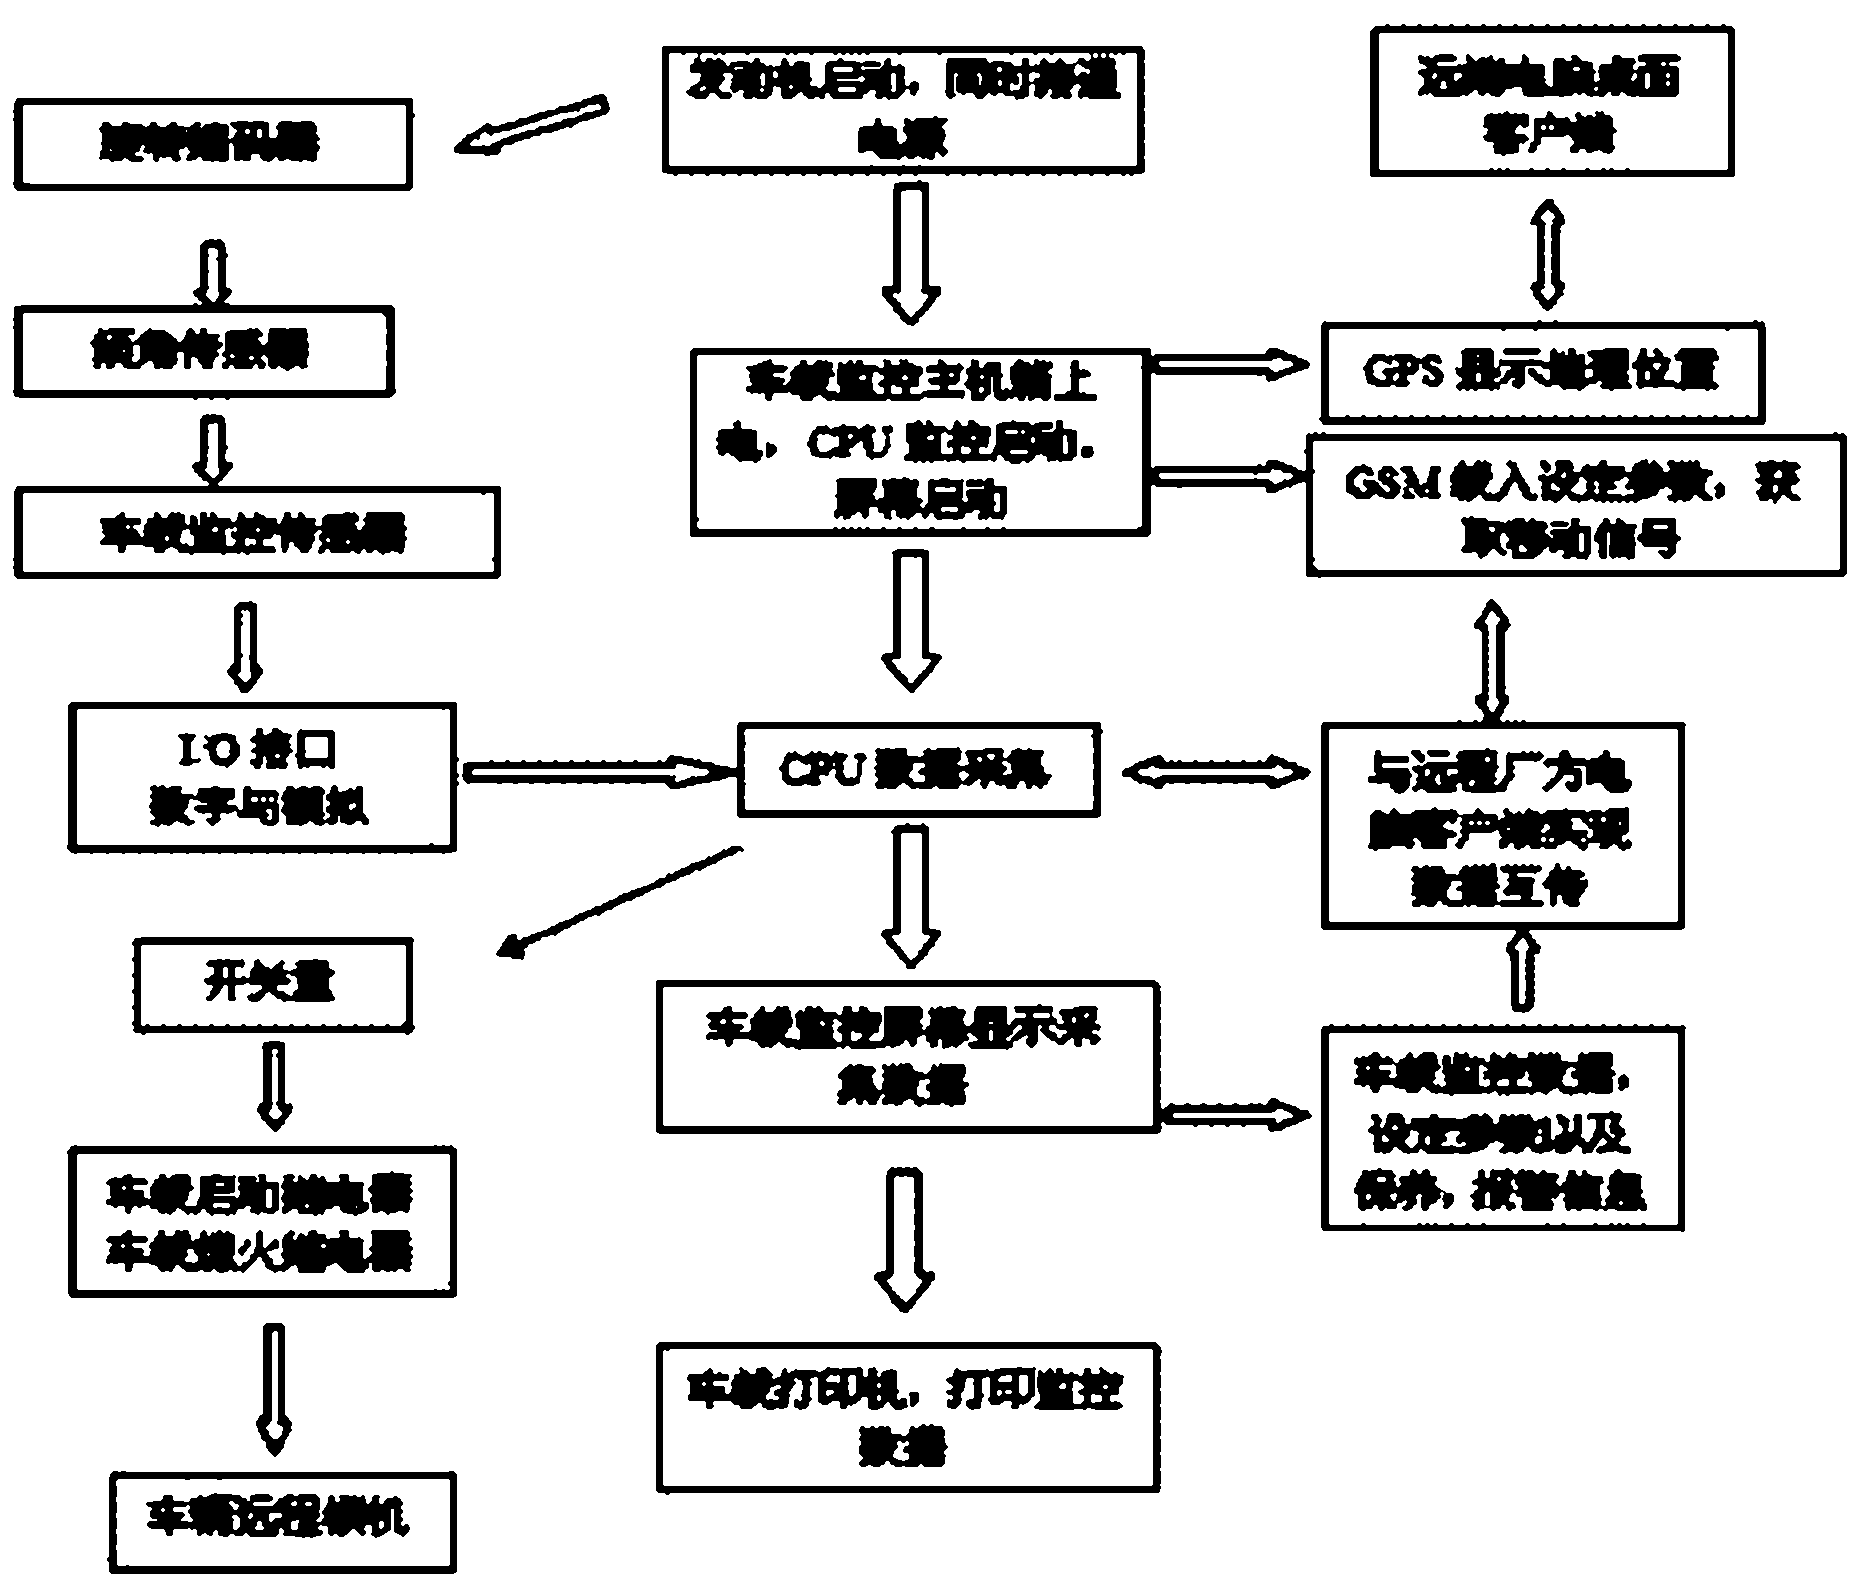 System and method for monitoring rotary drilling machine